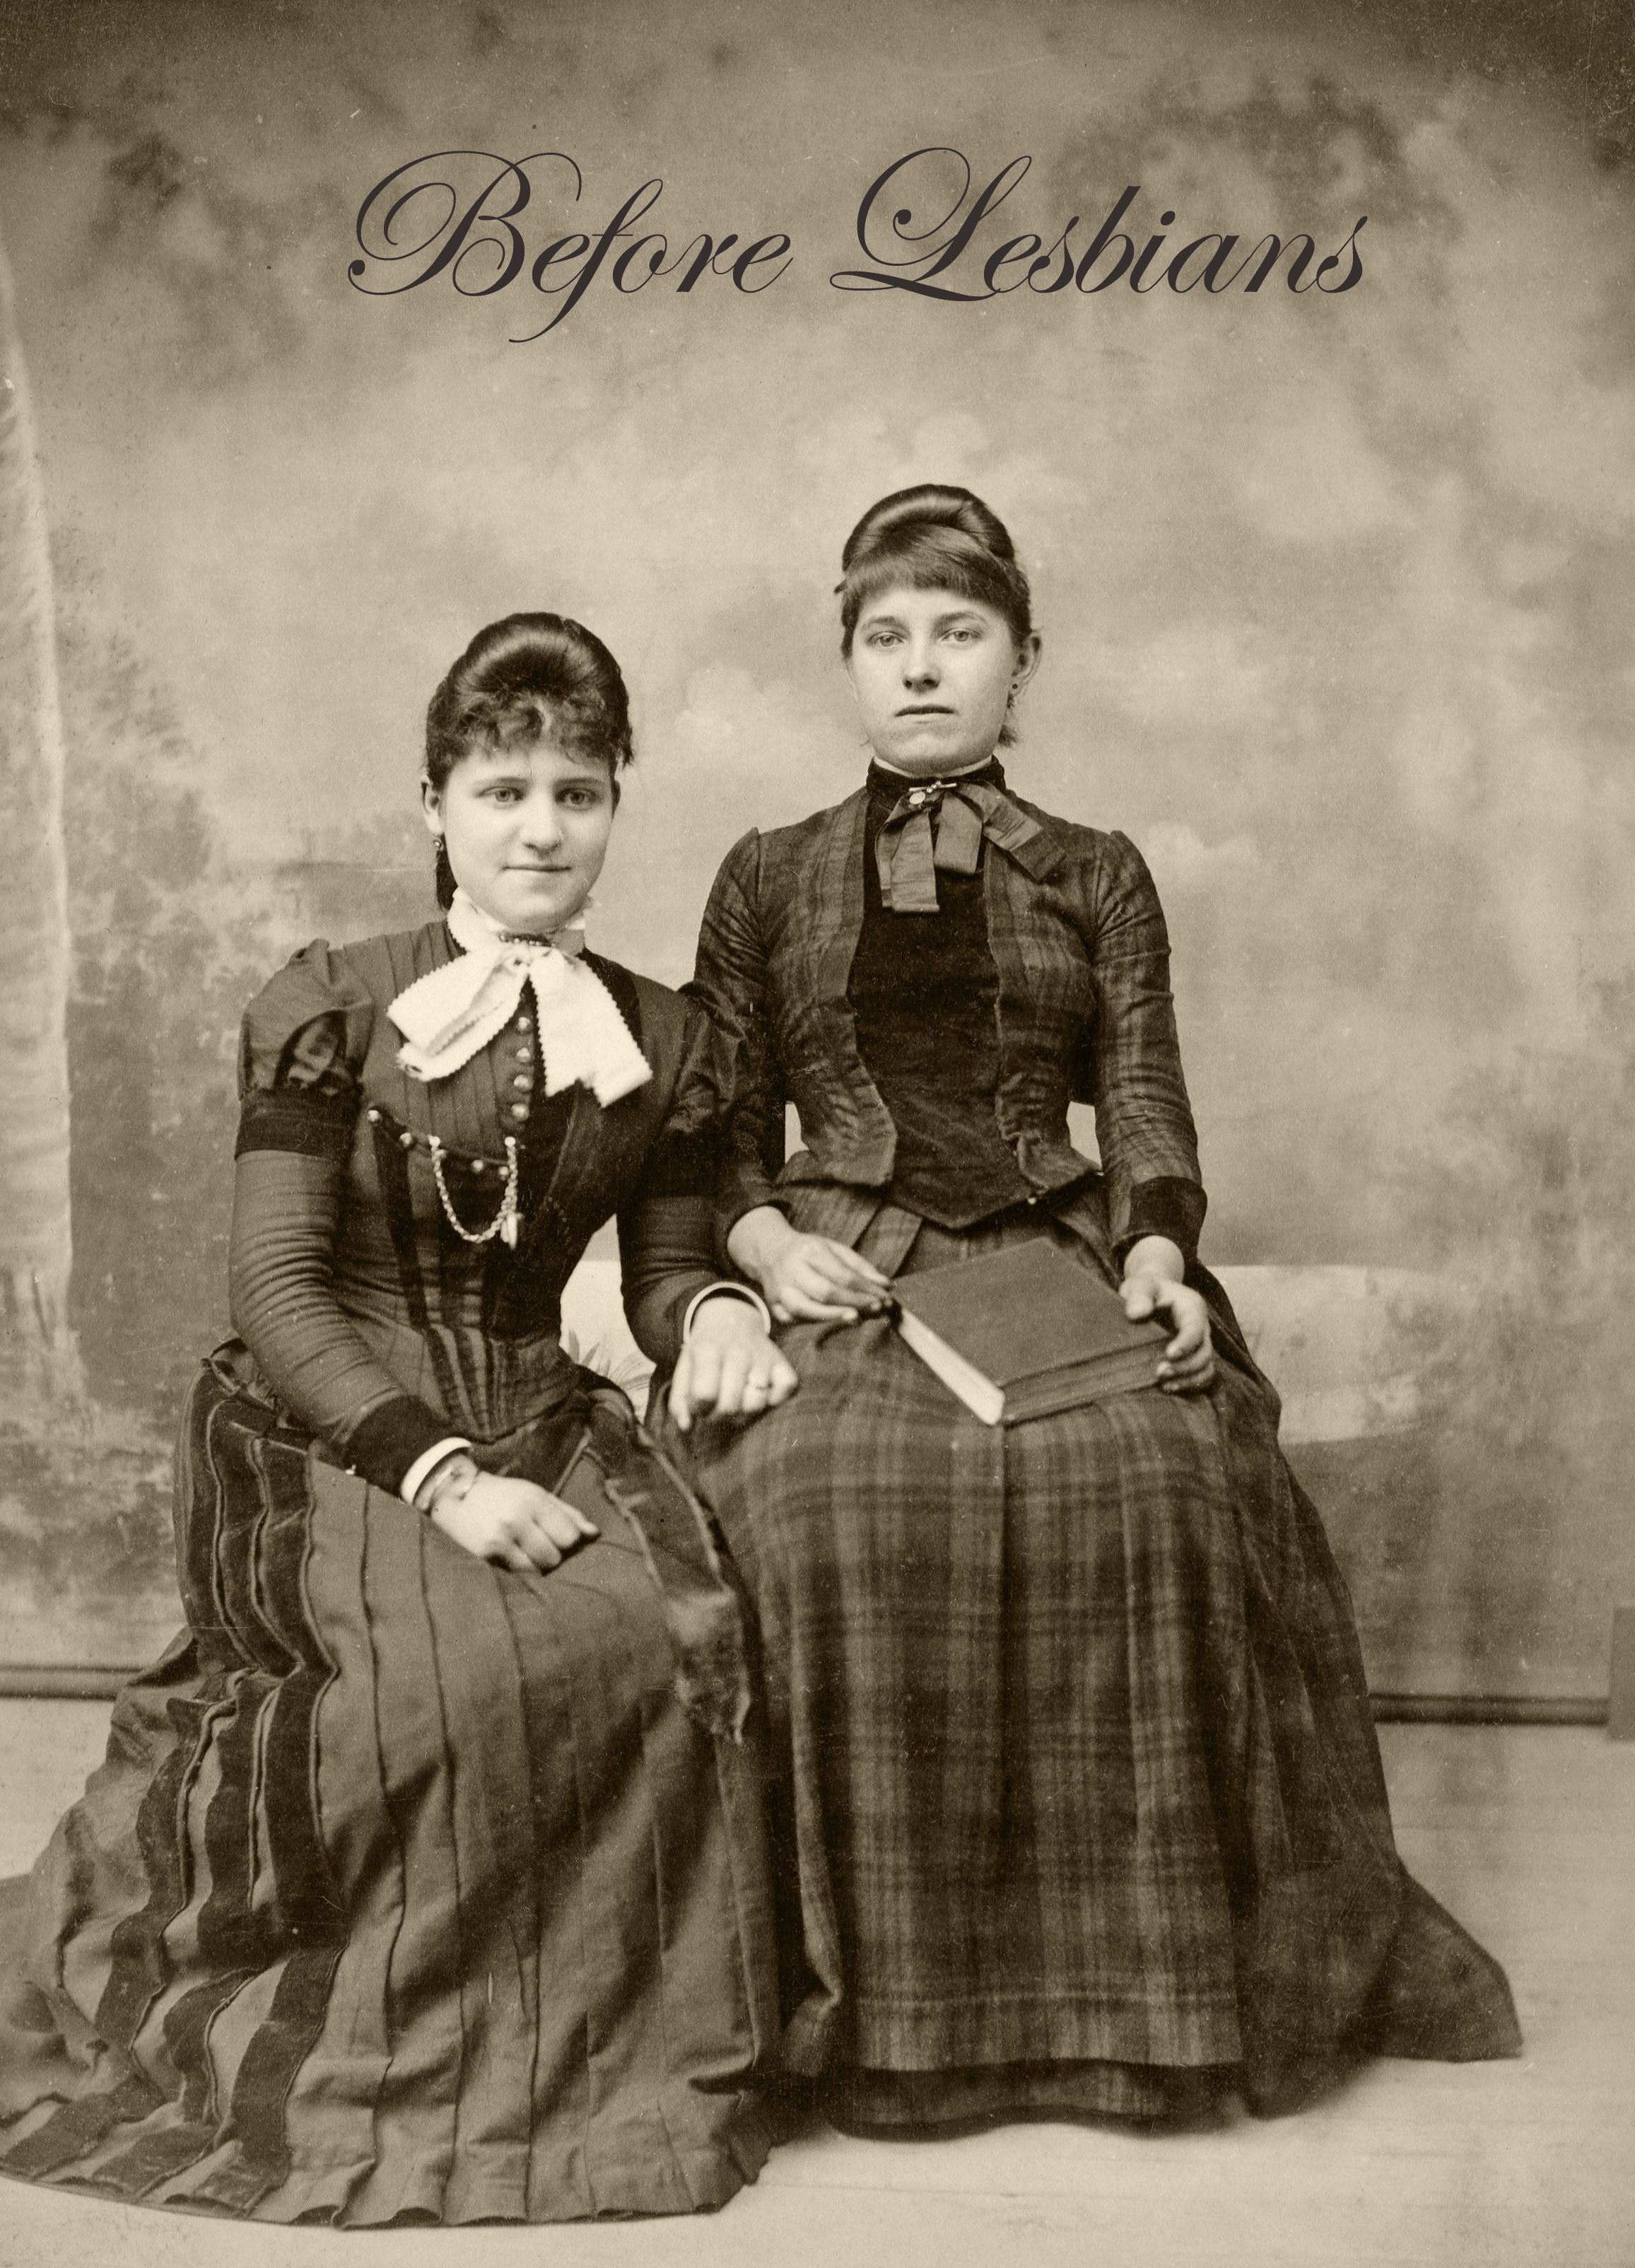 An old-fashioned photo of two women sitting side by side with book